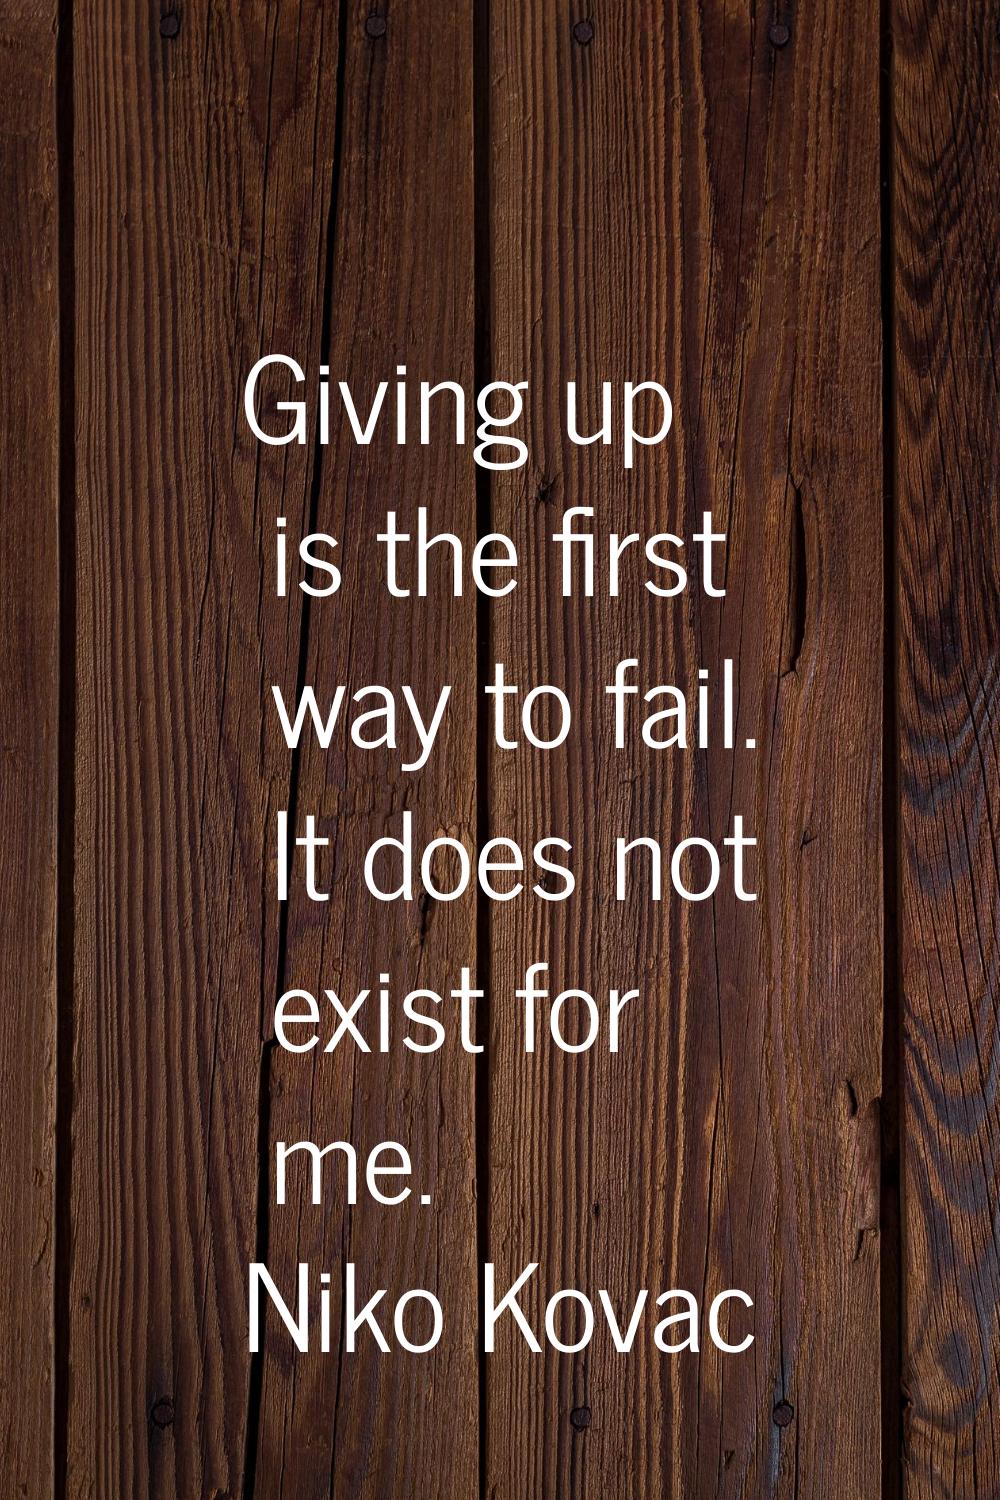 Giving up is the first way to fail. It does not exist for me.